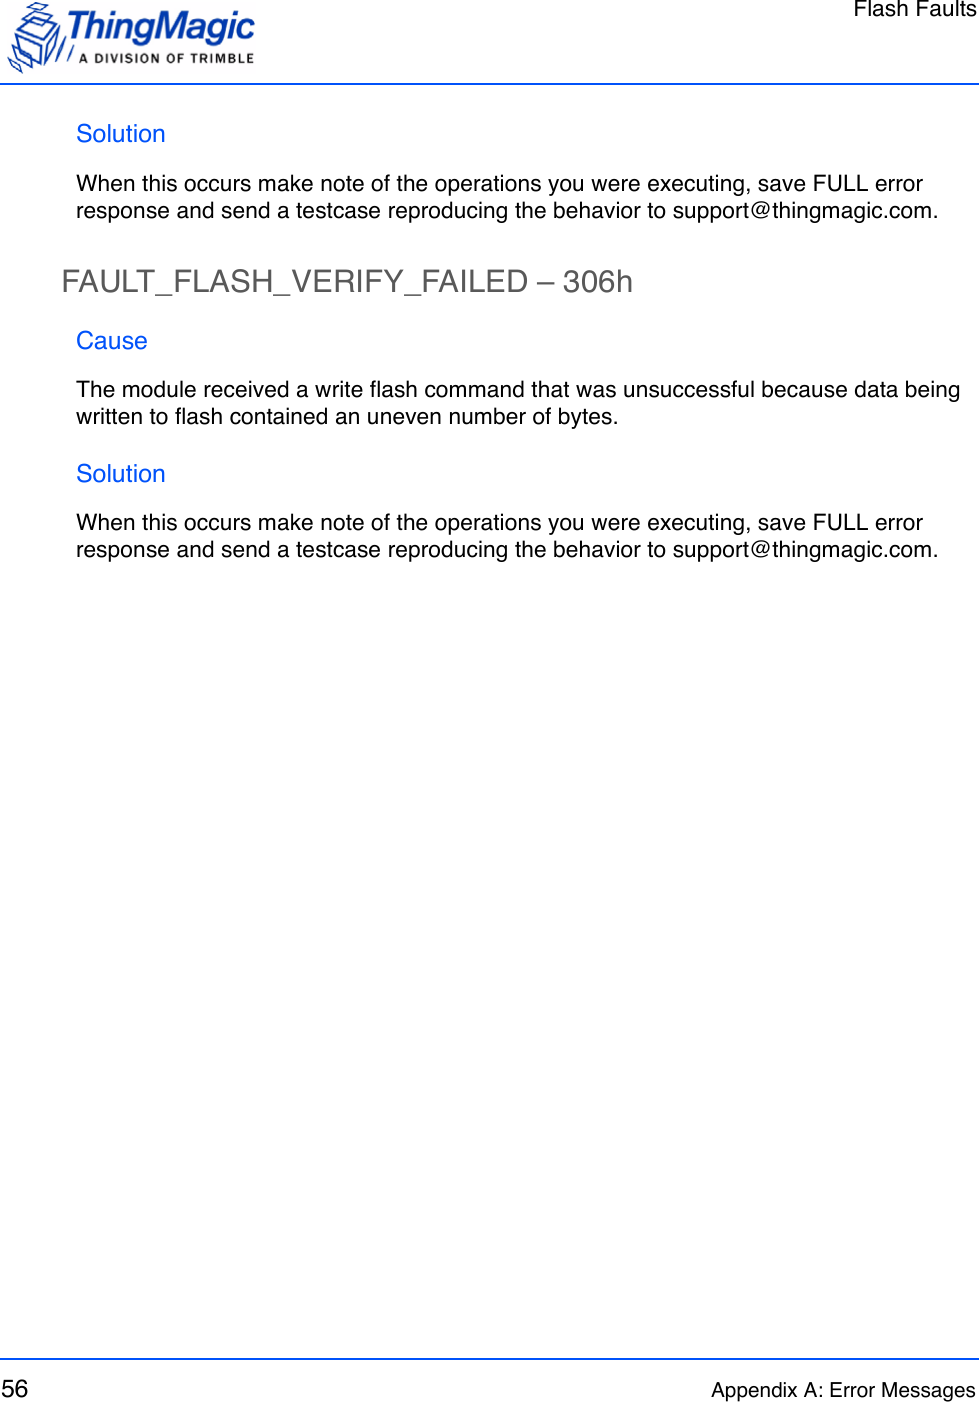 Flash Faults56 Appendix A: Error MessagesSolutionWhen this occurs make note of the operations you were executing, save FULL error response and send a testcase reproducing the behavior to support@thingmagic.com.FAULT_FLASH_VERIFY_FAILED – 306hCauseThe module received a write flash command that was unsuccessful because data being written to flash contained an uneven number of bytes.SolutionWhen this occurs make note of the operations you were executing, save FULL error response and send a testcase reproducing the behavior to support@thingmagic.com.